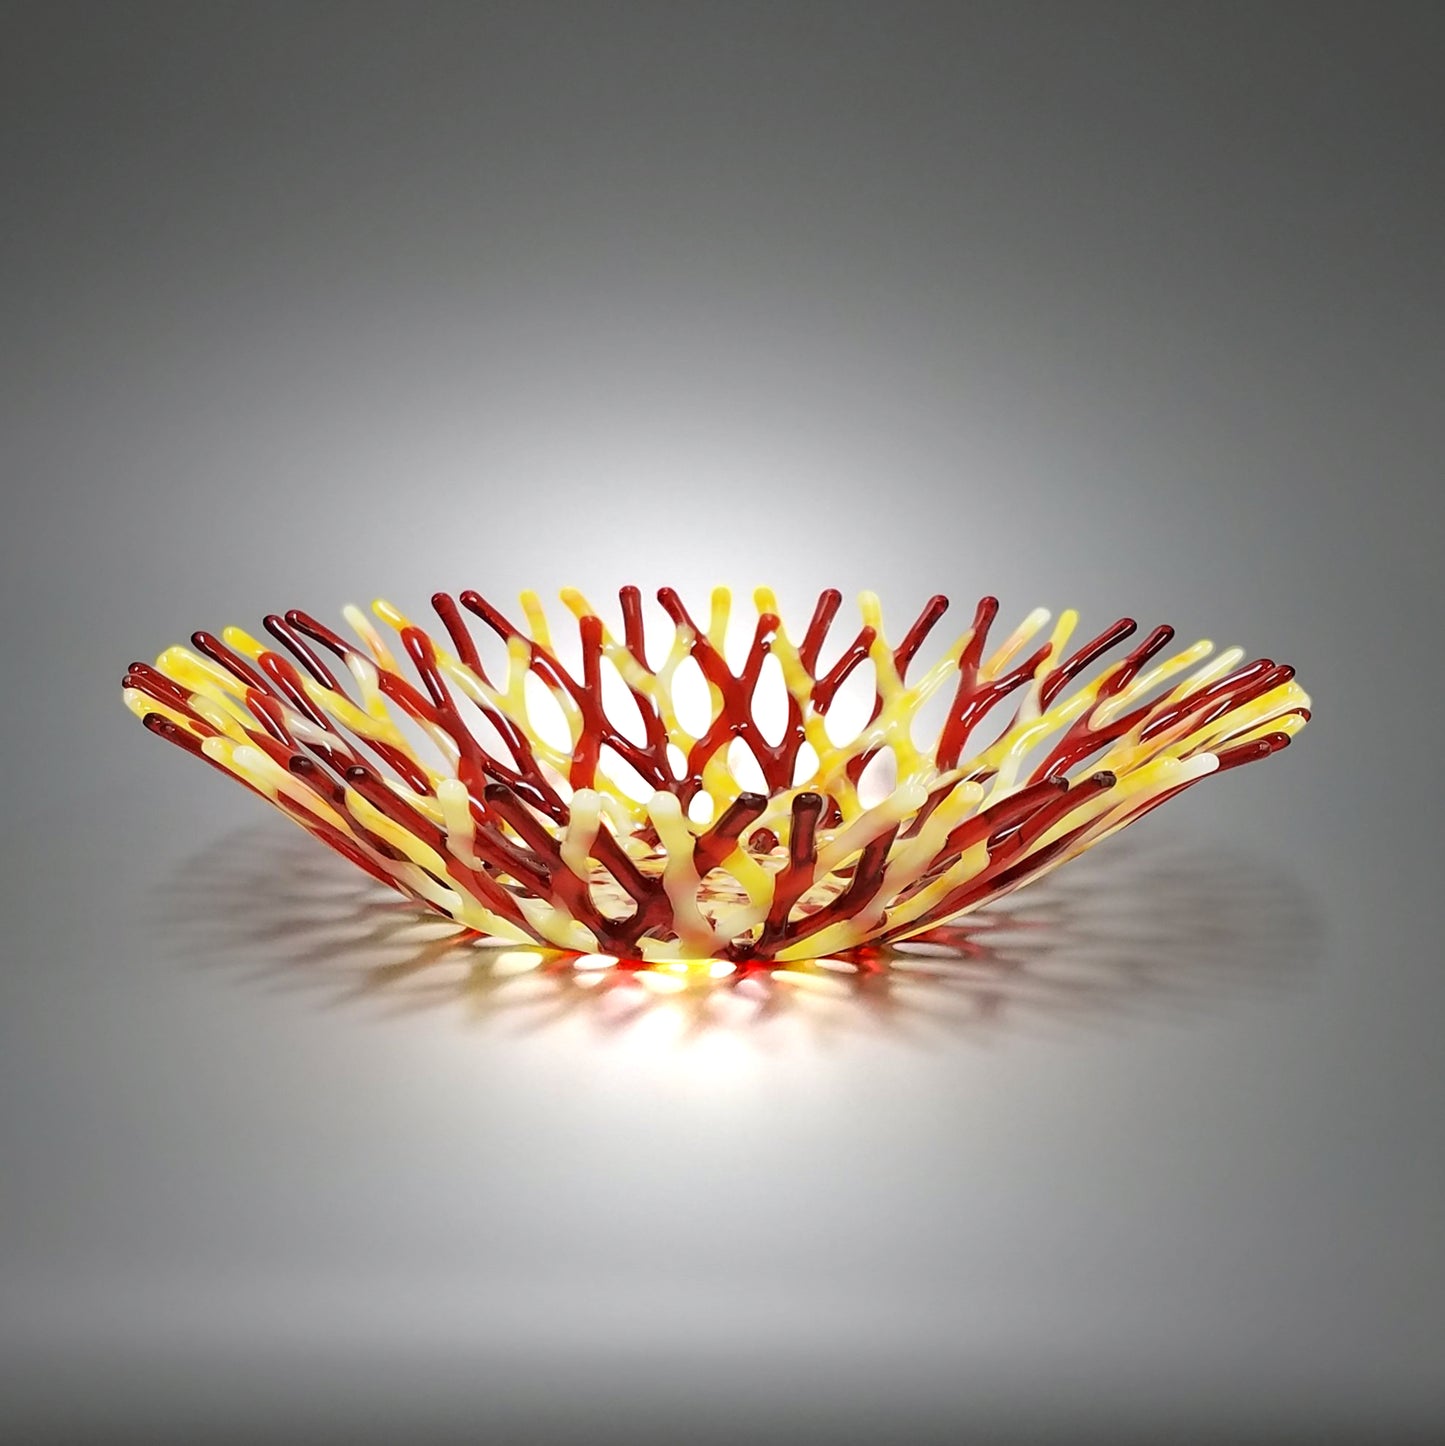 Glass Art Coral Bowl | Glass Sculpture | Beach Themed Table Decor in Pineapple Yellow and Dark Orange |